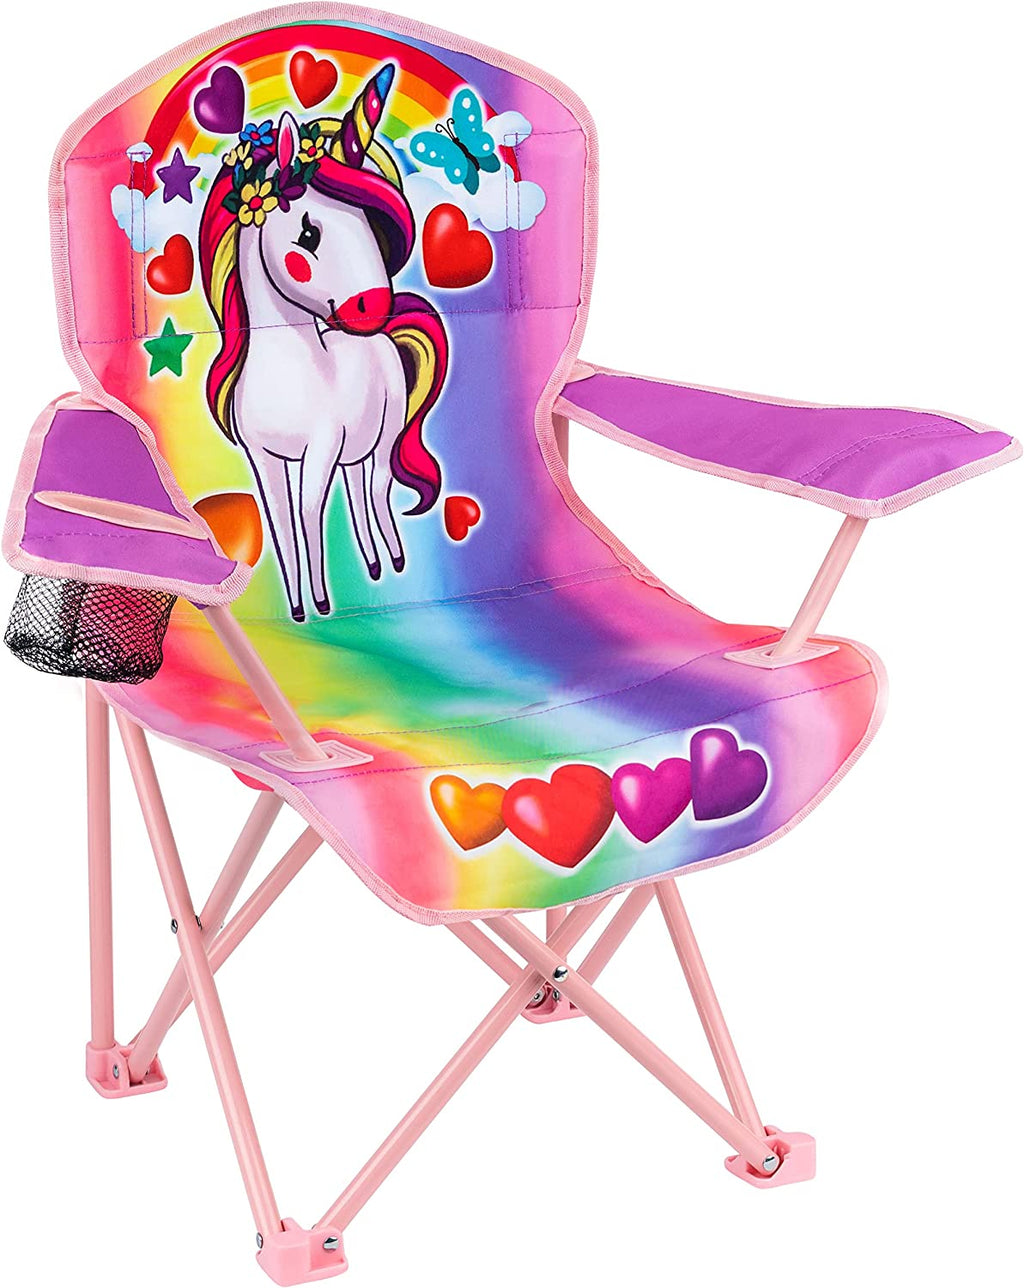 Toy To Enjoy Outdoor Unicorn Chair for Kids Foldable Children’s Chair for Camping, Tailgates, Beach, Fishing, – Portable Carrying Bag Included Mesh Cup Holder & Sturdy Construction. Available Ages 2-5 or 5 to 10